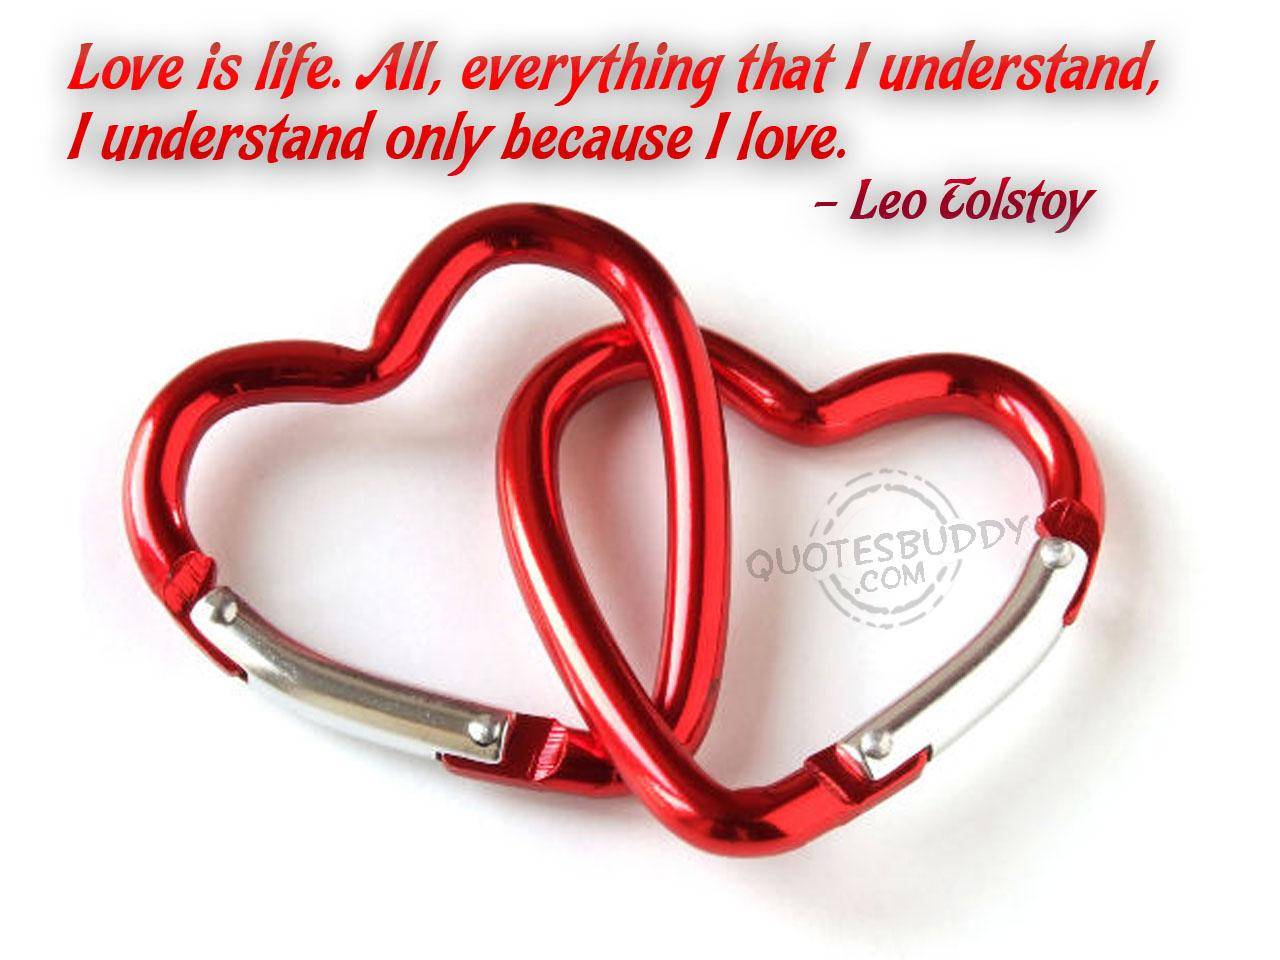 Love is life. All, everything that I understand, I understand only because I love.